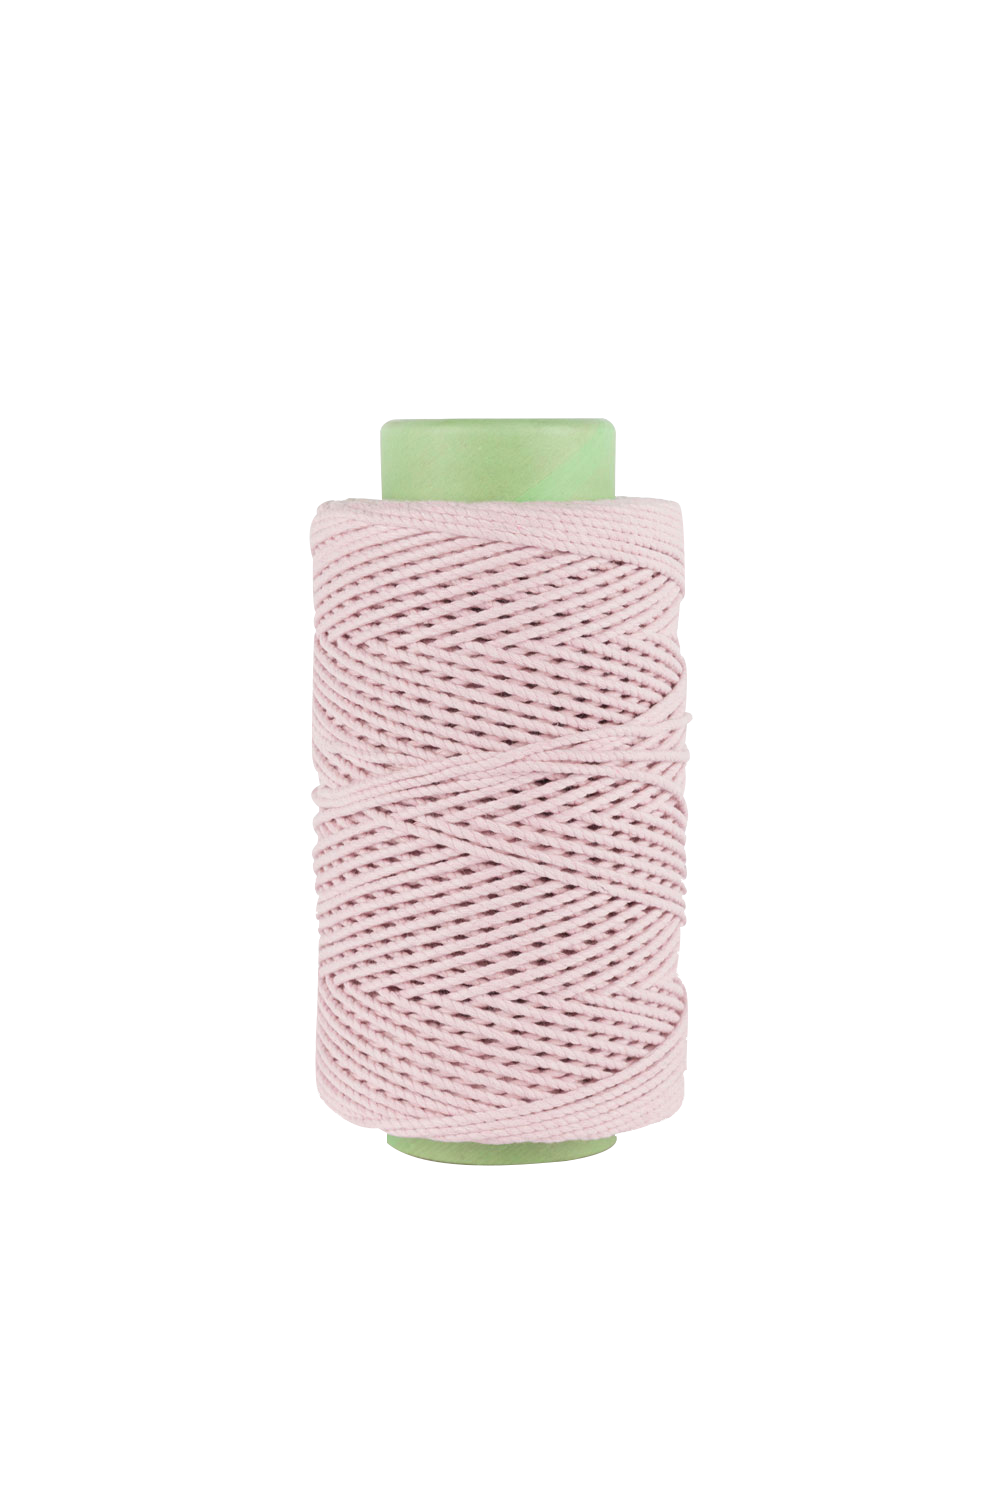 3mm 2 ply 100% cotton rope in light pink